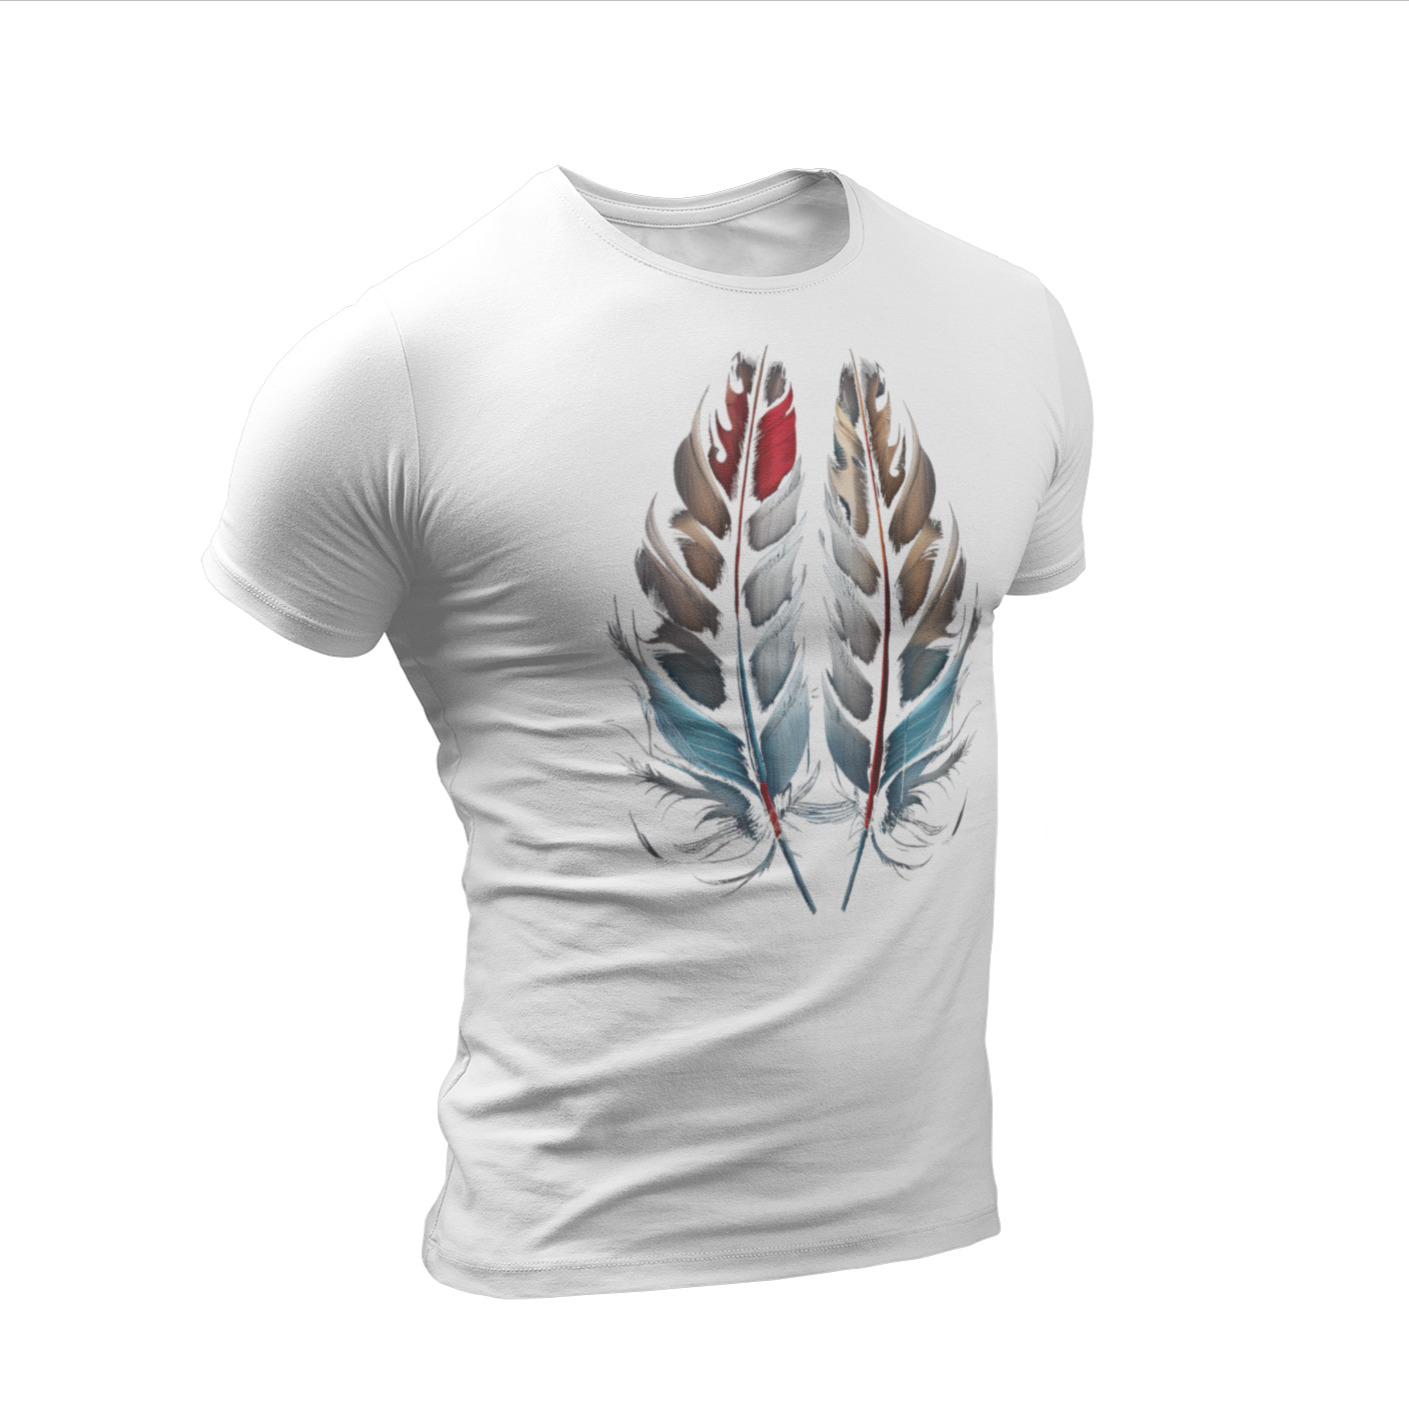 Image of a classic tee adorned with vibrant tribal feathers, crafted from the industry's favorite fabric. The slim cut offers a curvy silhouette, while the fine-gauge fabric ensures lightweight comfort for everyday wear.